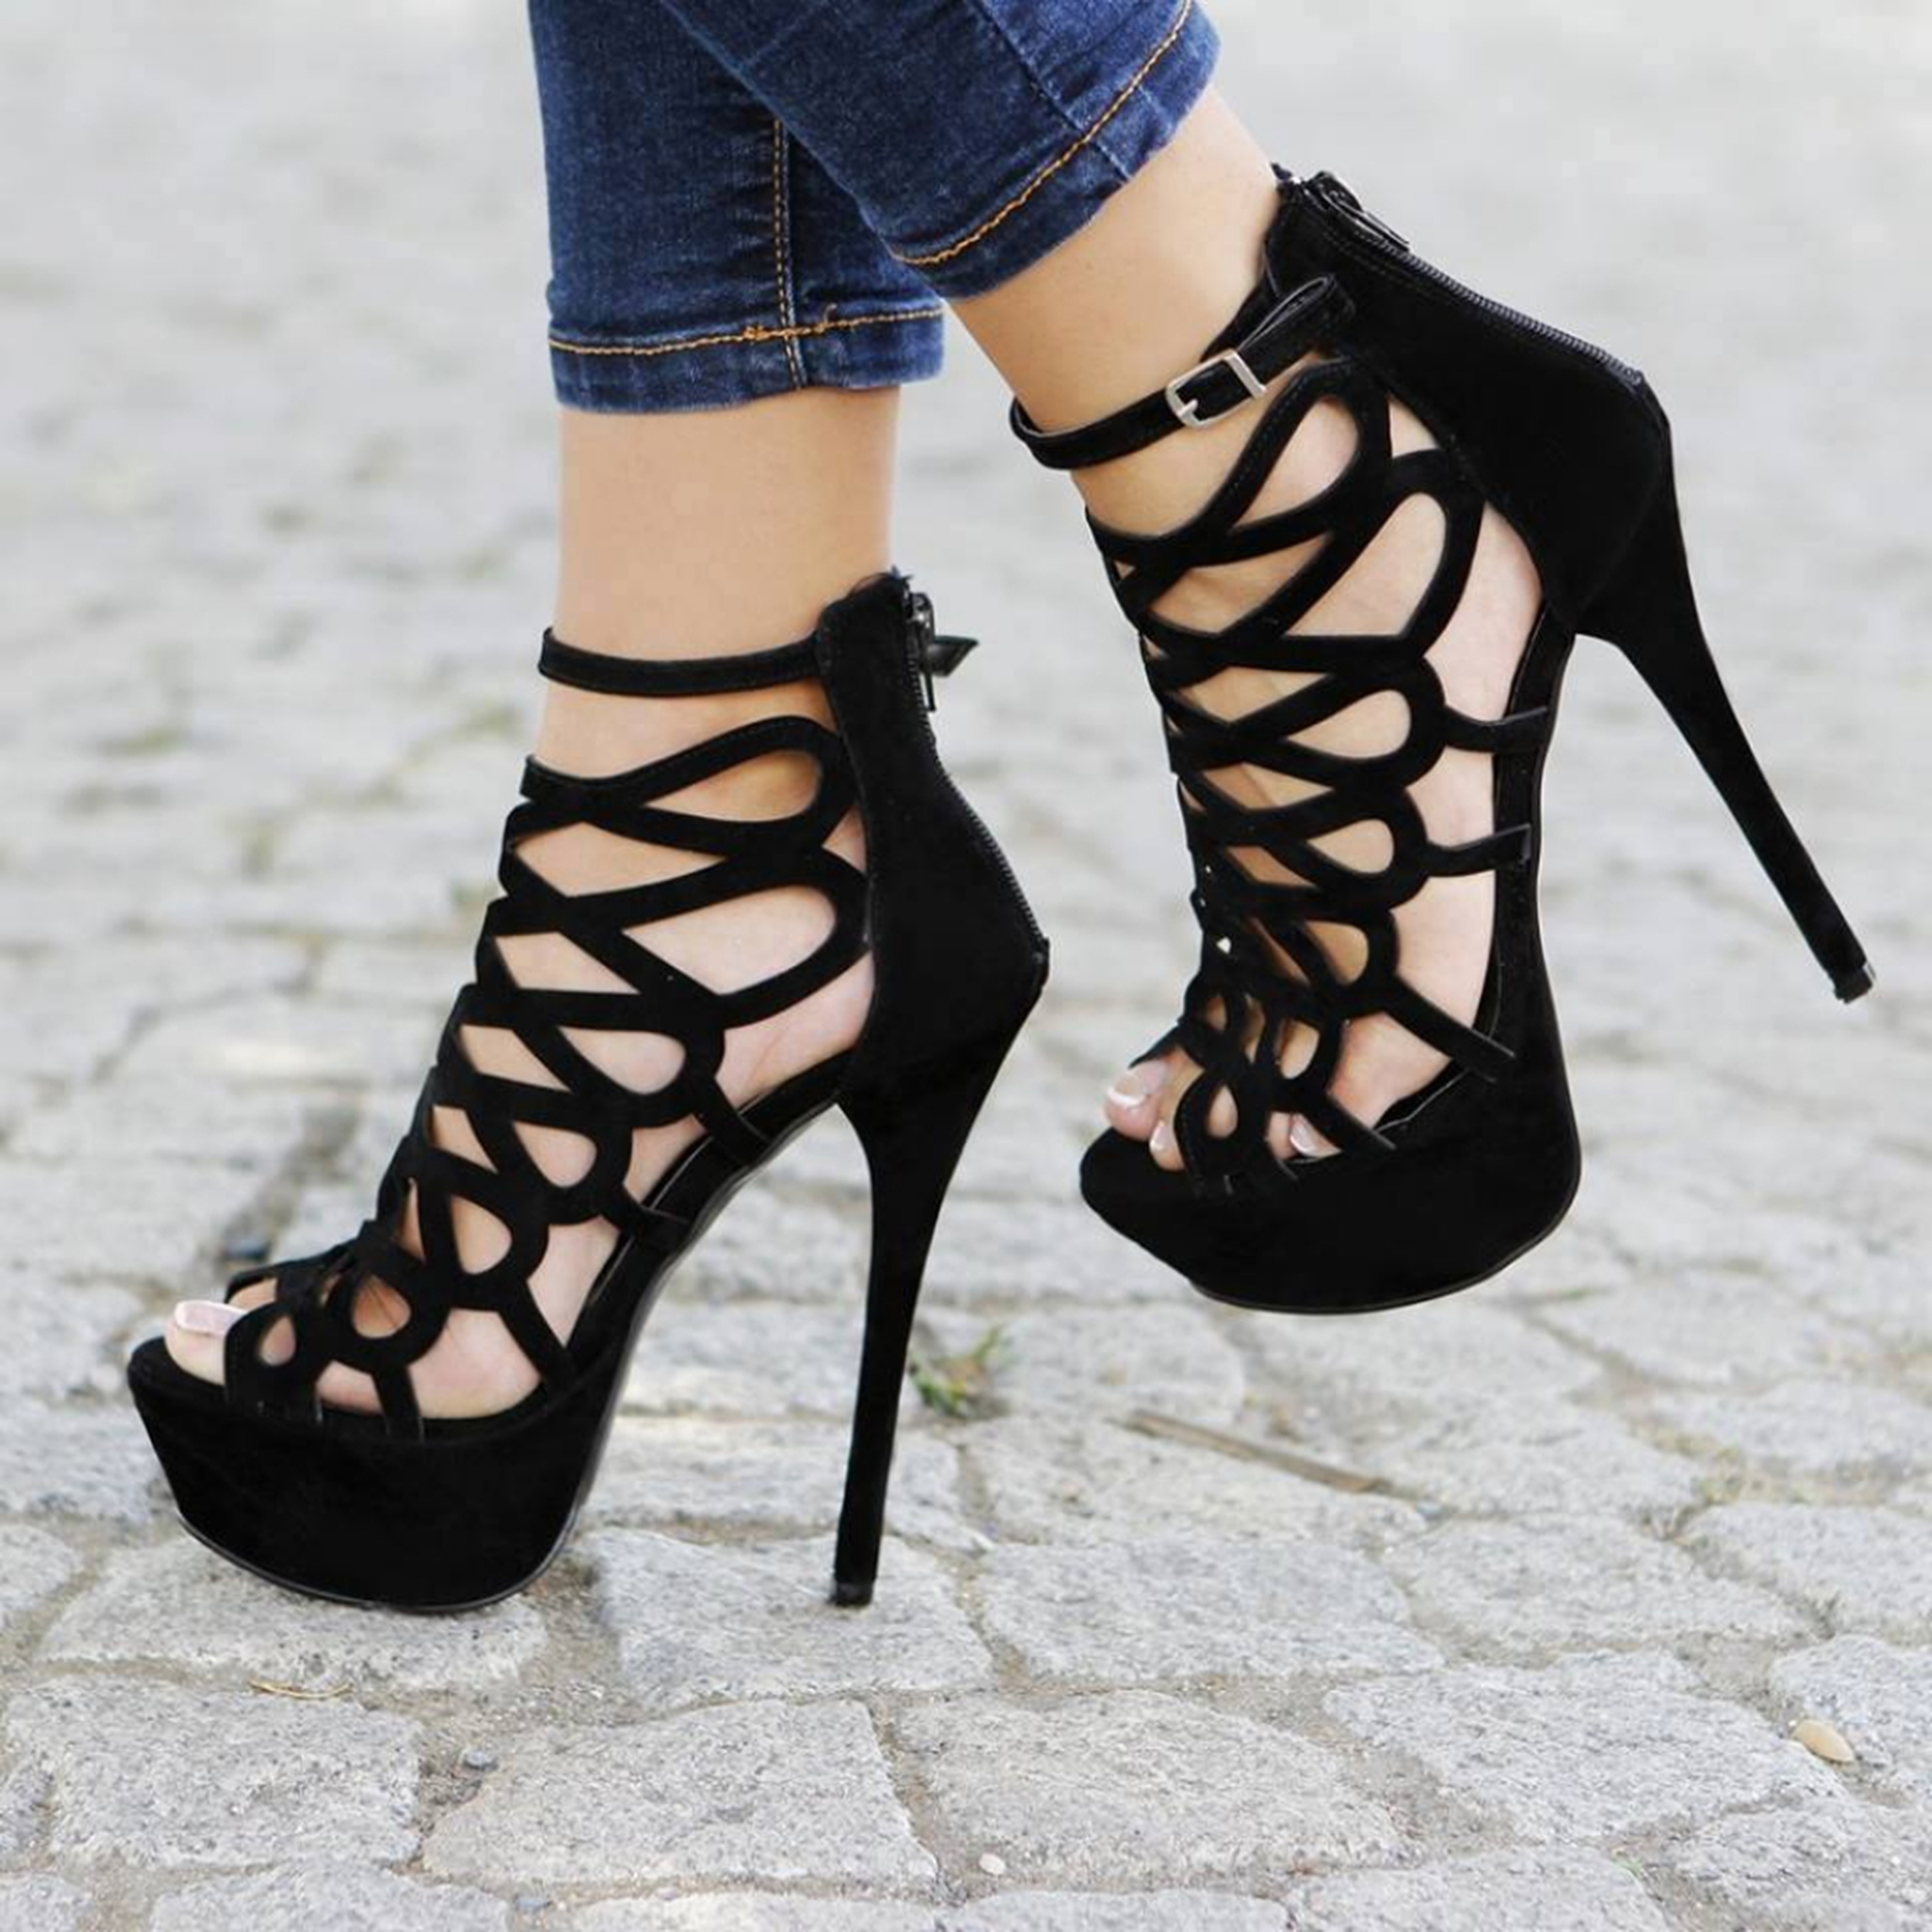 High Heel Shoes For Girls Girls High Heel Shoes All Fashion News Fashion Blog And Magazine - Best Outfit Ideas